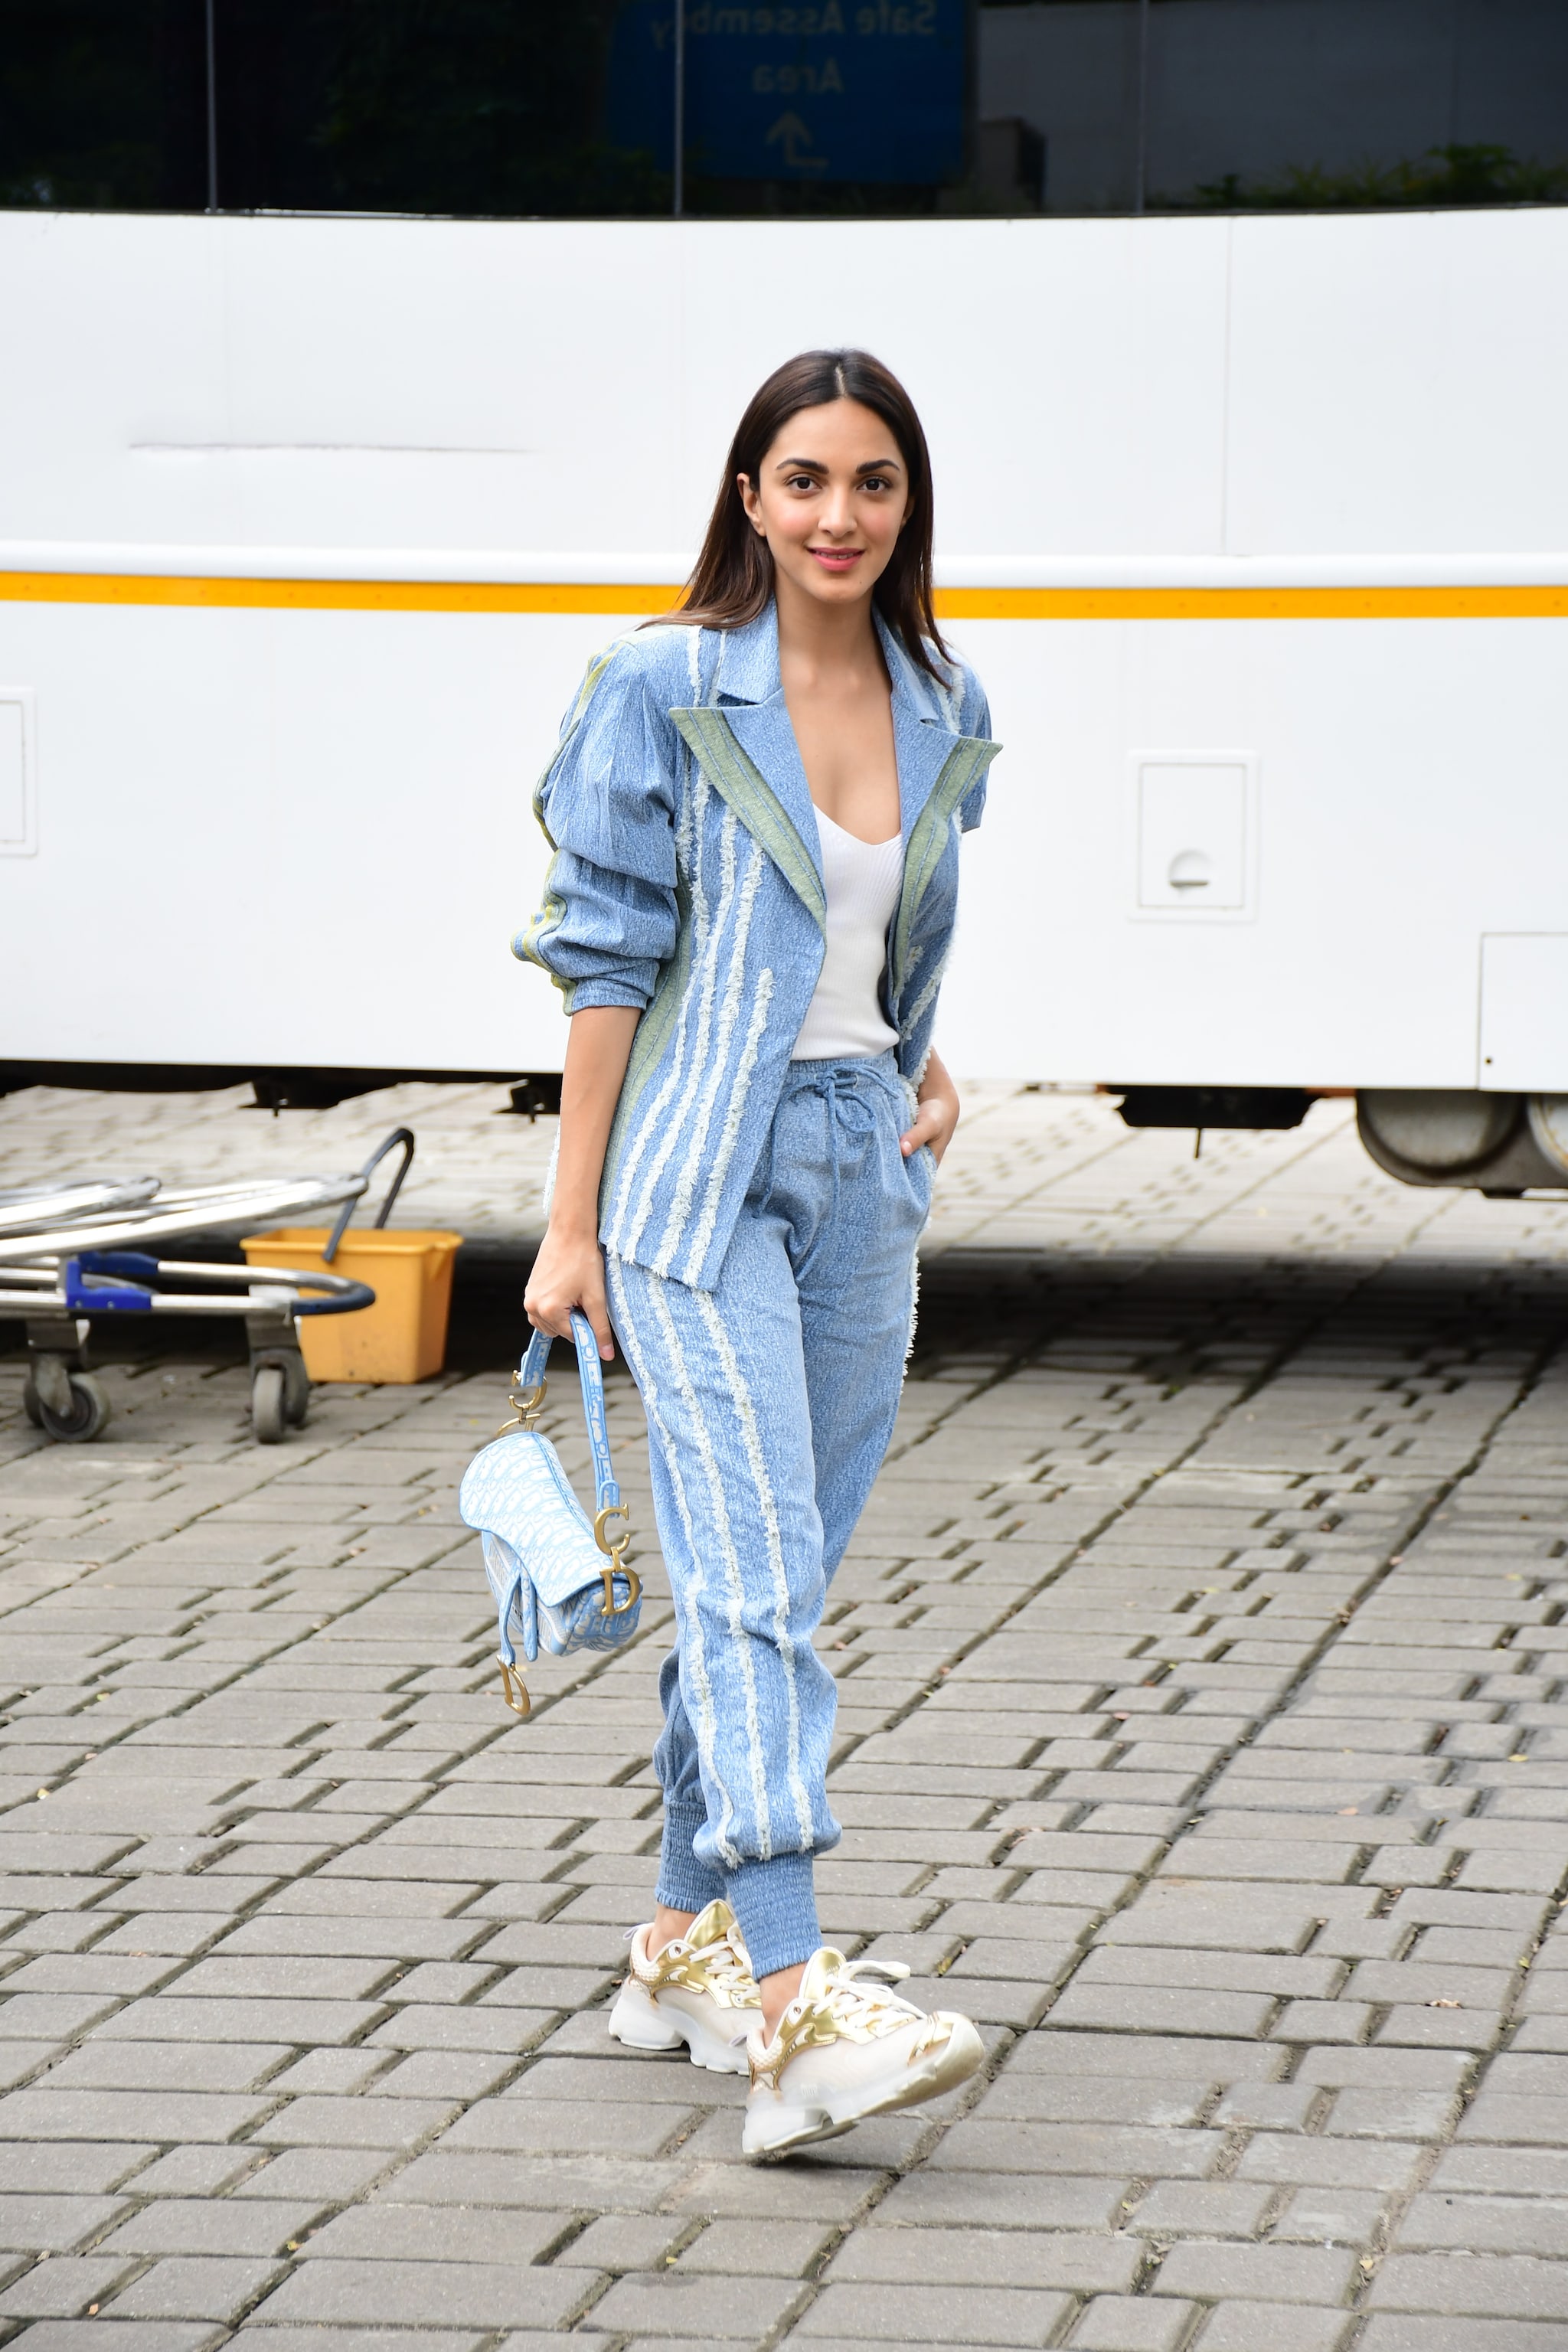 Five casual looks to try from Deepika Padukone's closet